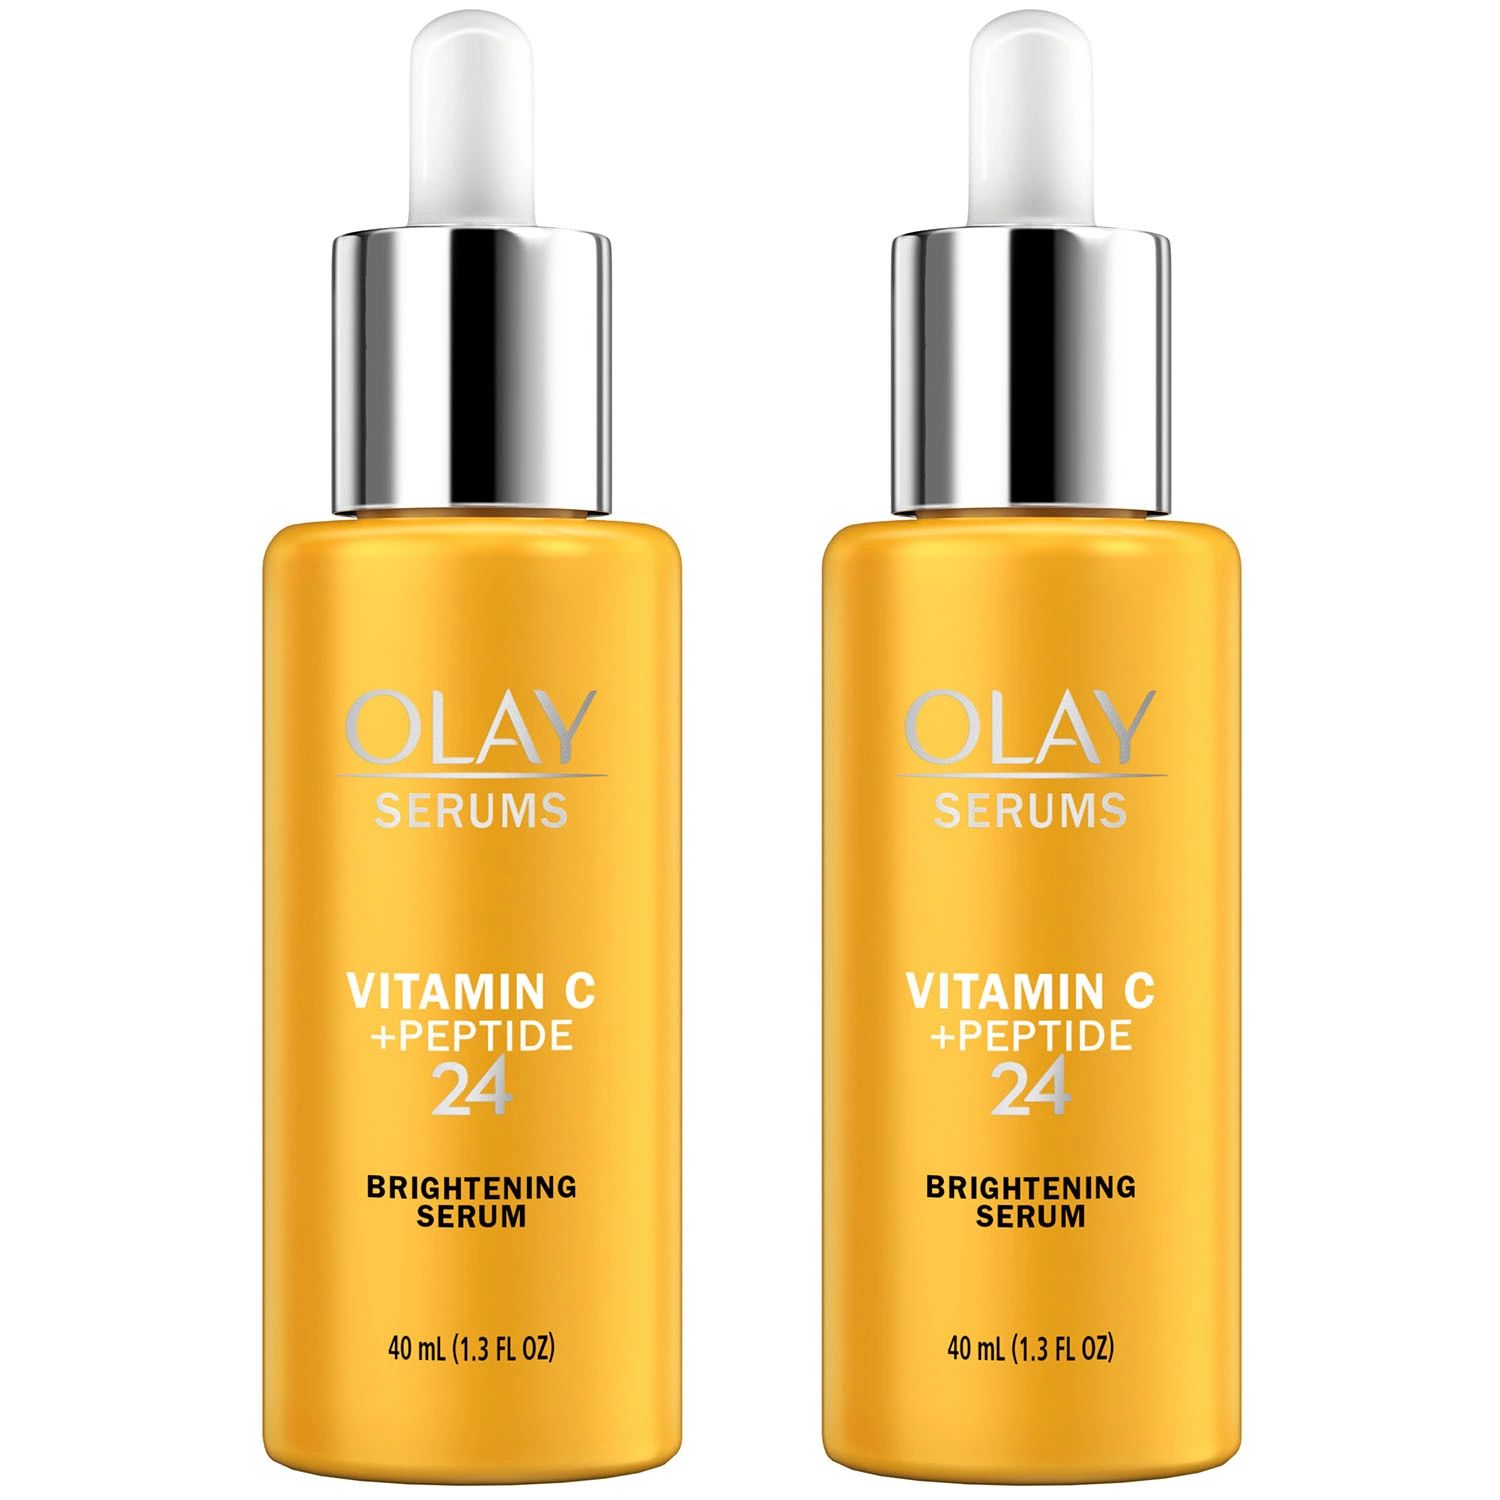 Olay Vitamin C + Peptide 24 Serum, 1.3 Ounce (Pack of 2) - image 4 of 5